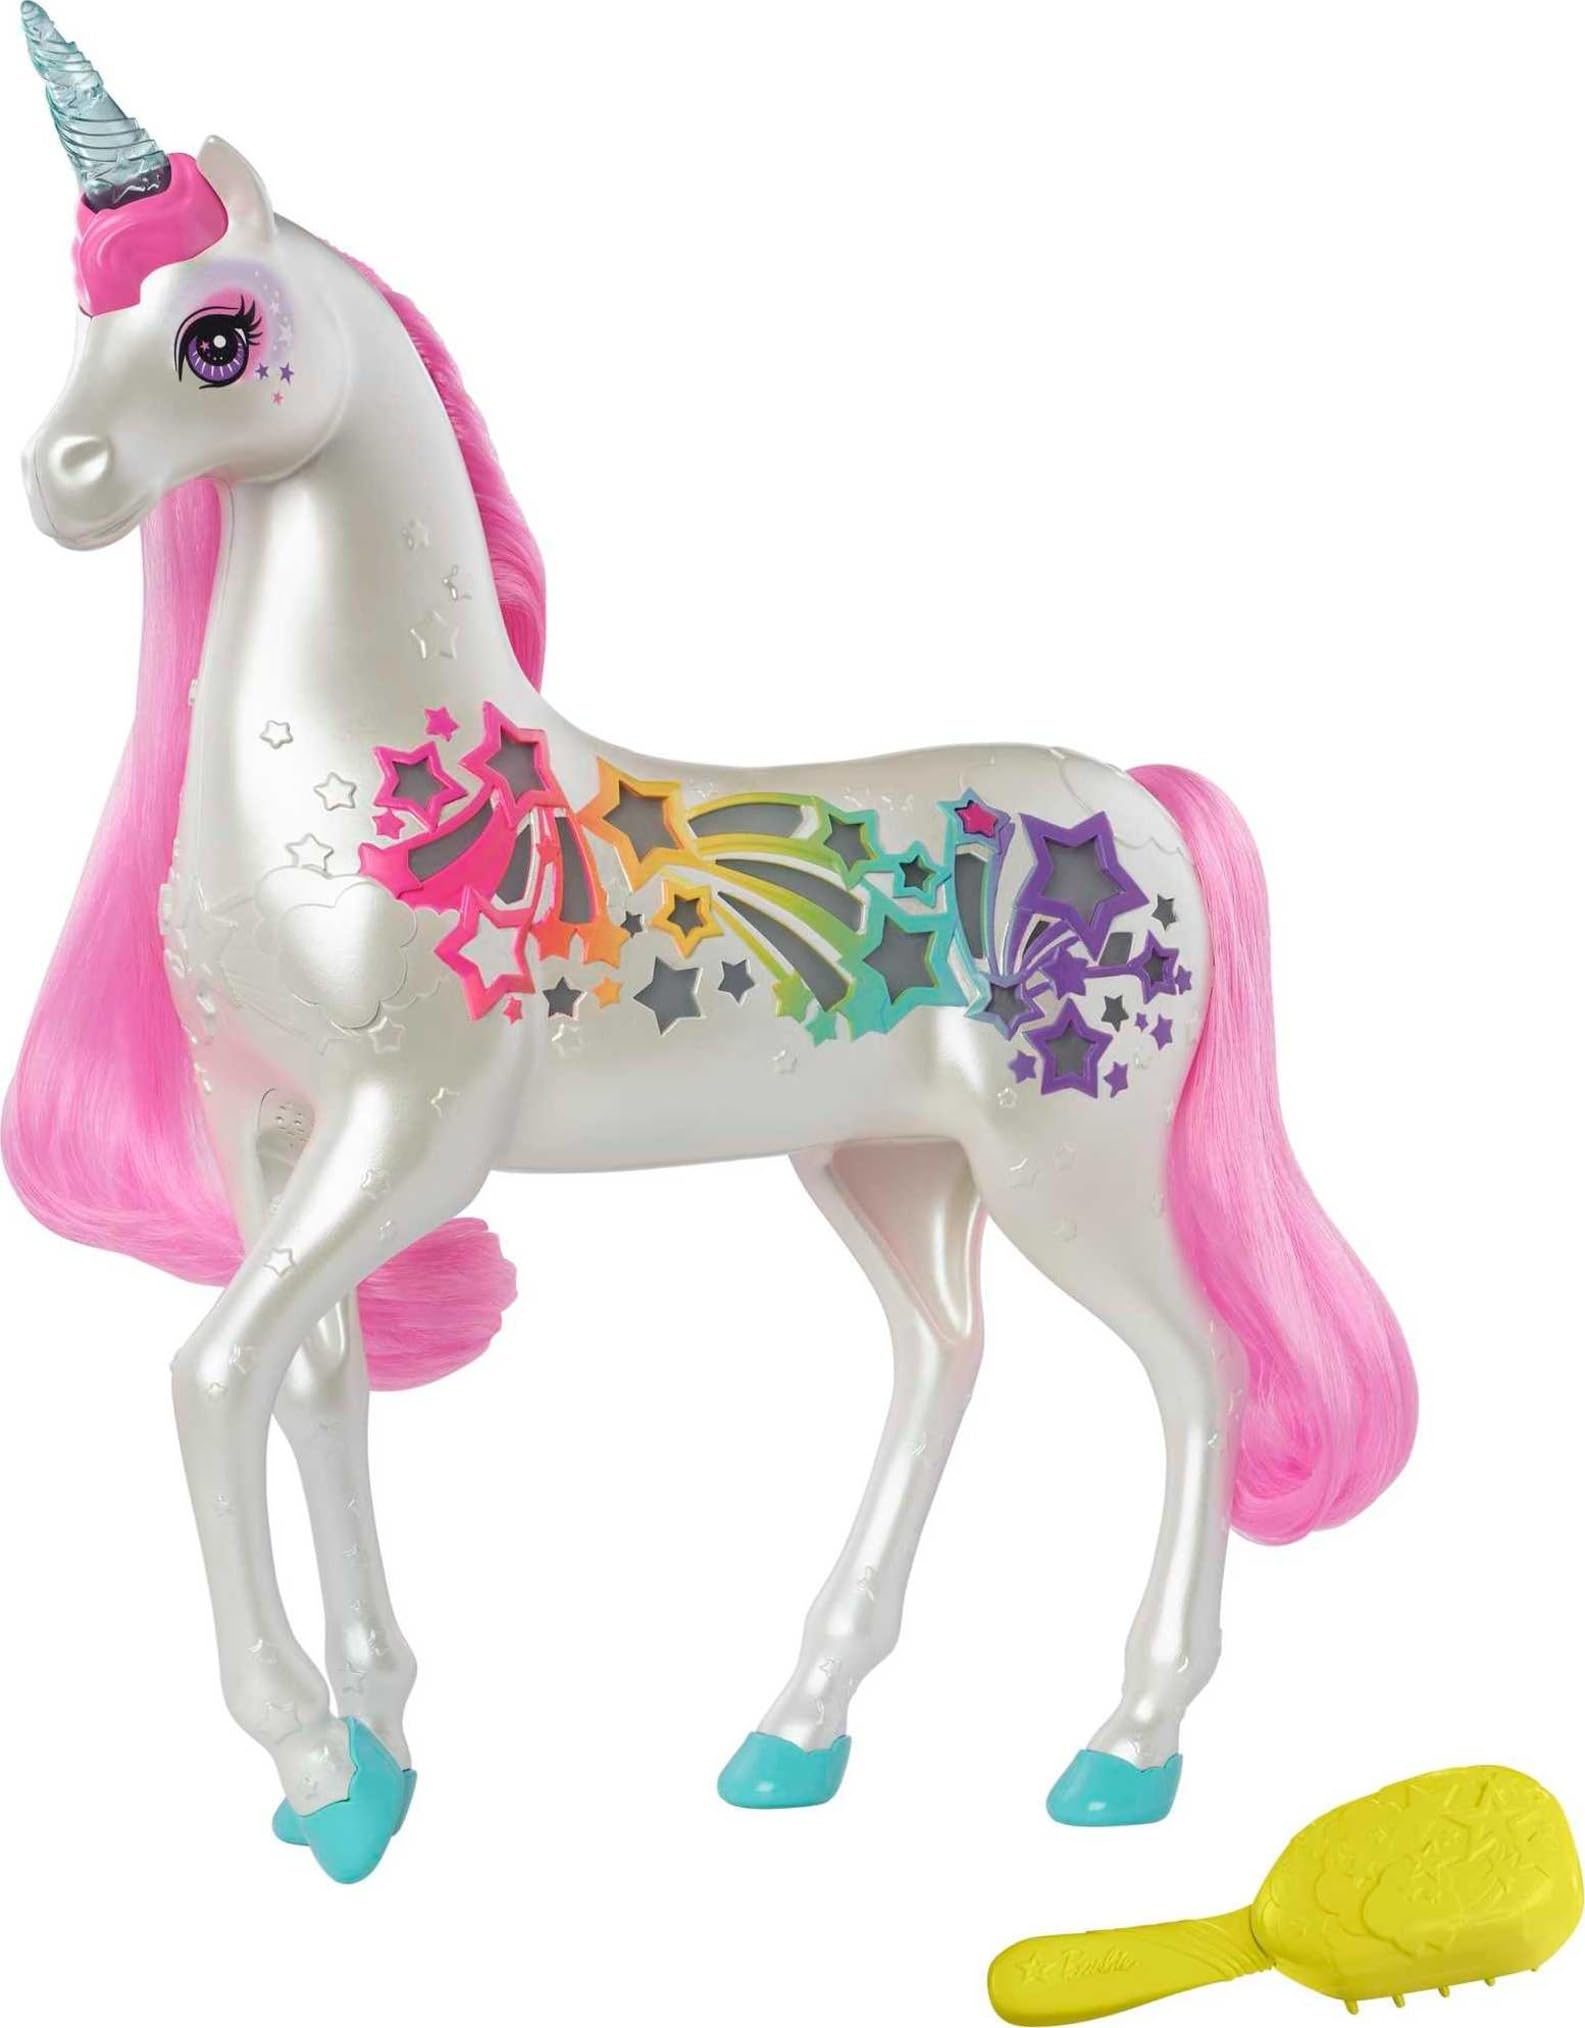 Barbie Dreamtopia Brush 'n Sparkle Unicorn w/ Lights & Sounds $15.50 + Free Shipping w/ Prime or on $35+